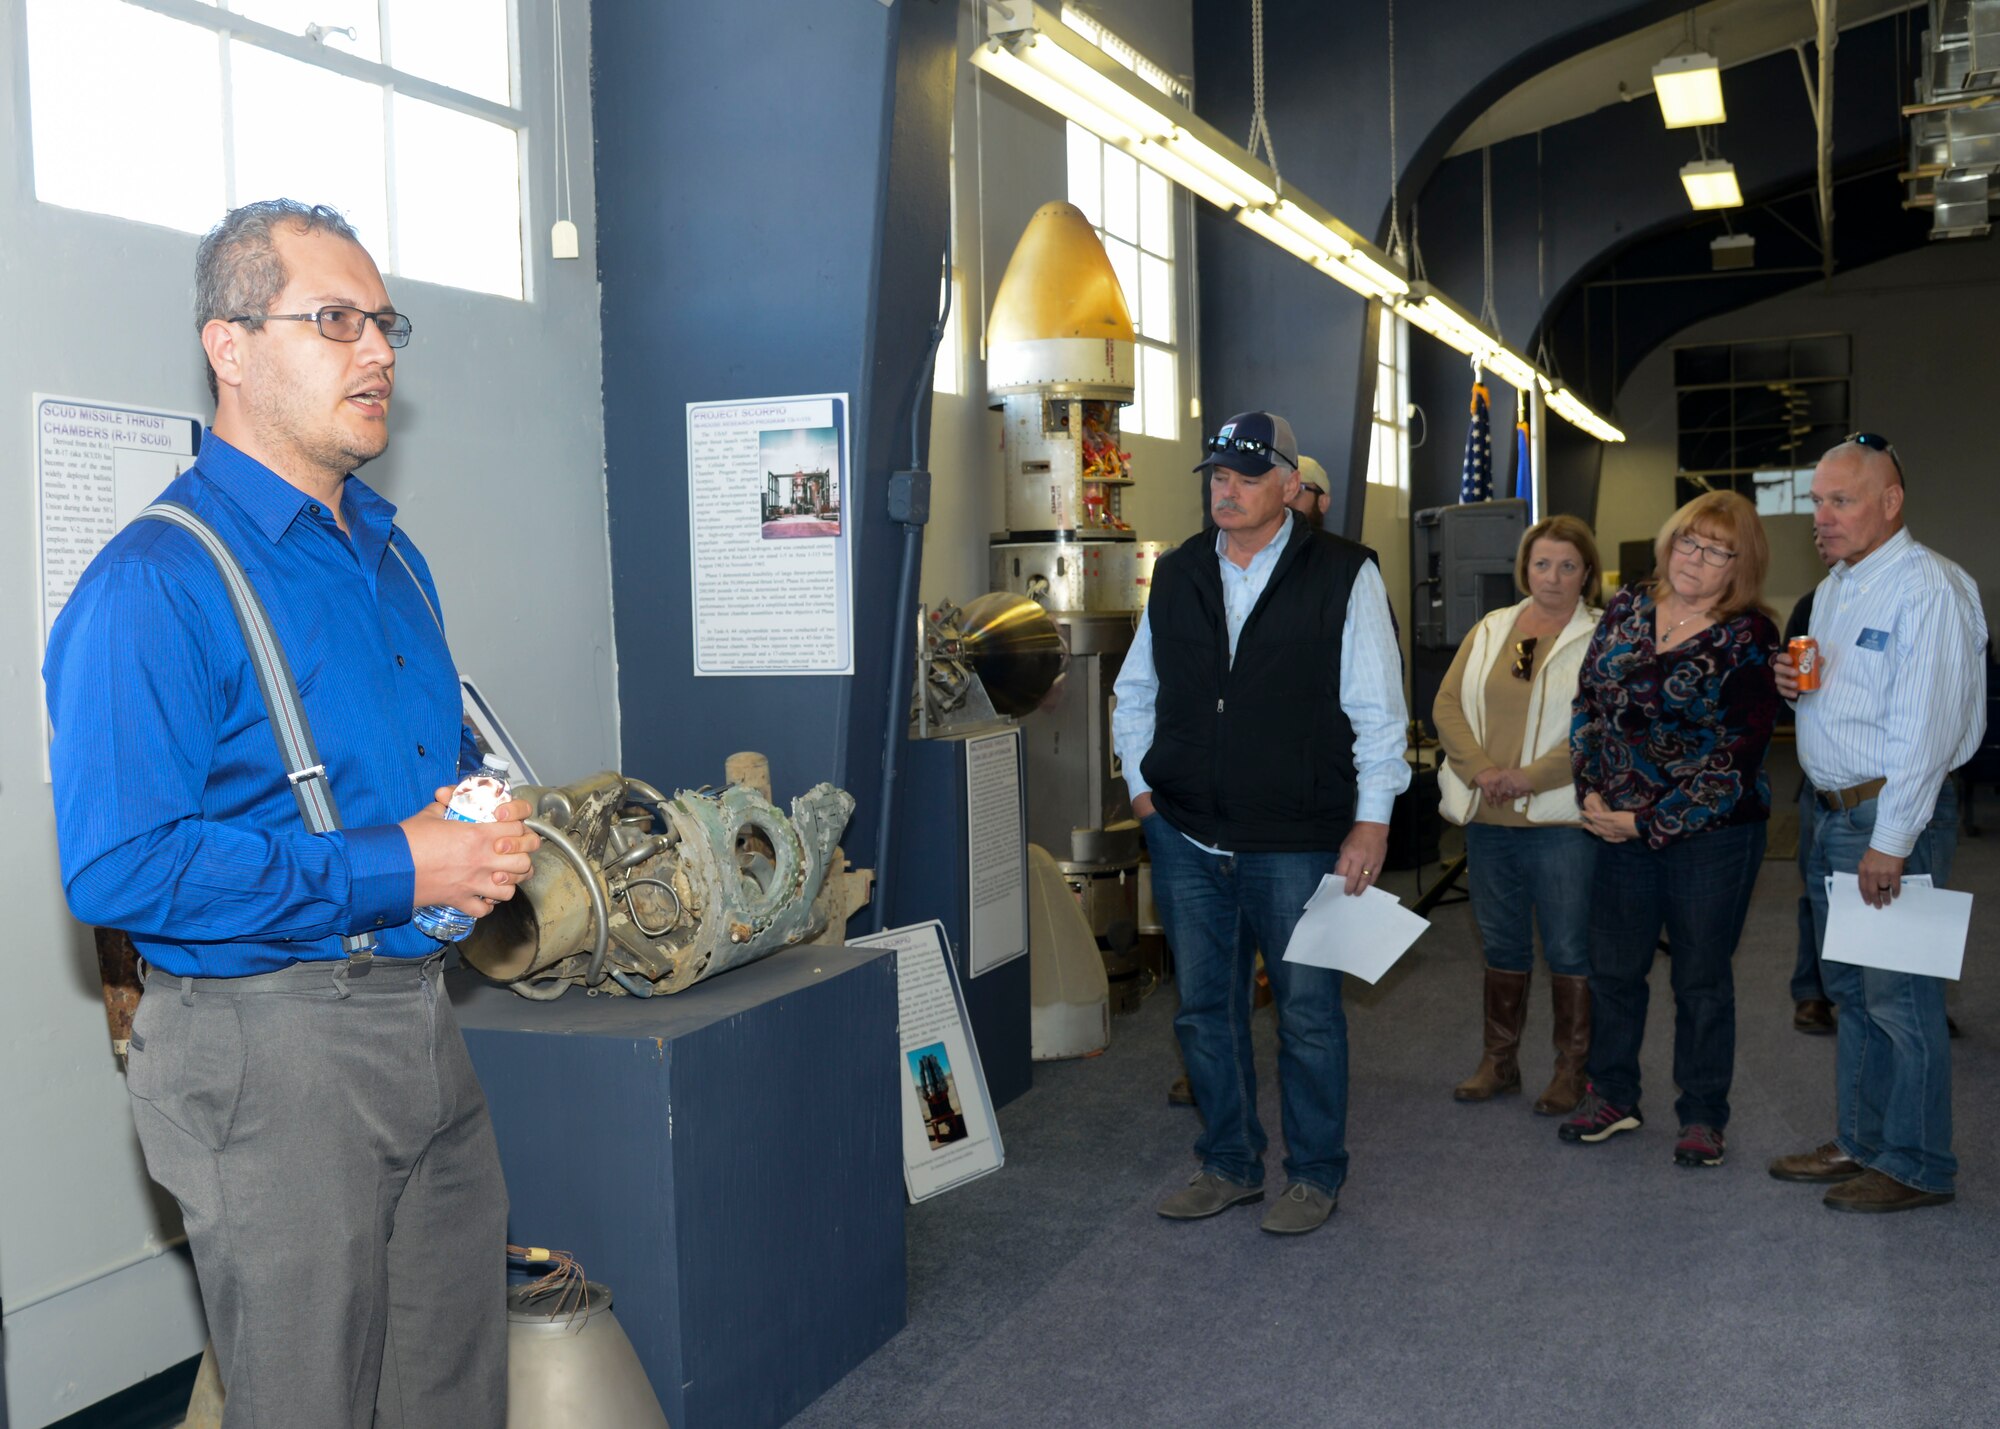 Nils Sedano, Air Force Research Laboratory, Engines Branch technical advisor, gives a tour of the AFRL “Rocket Laboratory’s” Heritage Room during an Honorary Commanders tour at Edwards Air Force Base, California, Nov. 9 (U.S. Air Force photo by Giancarlo Casem)